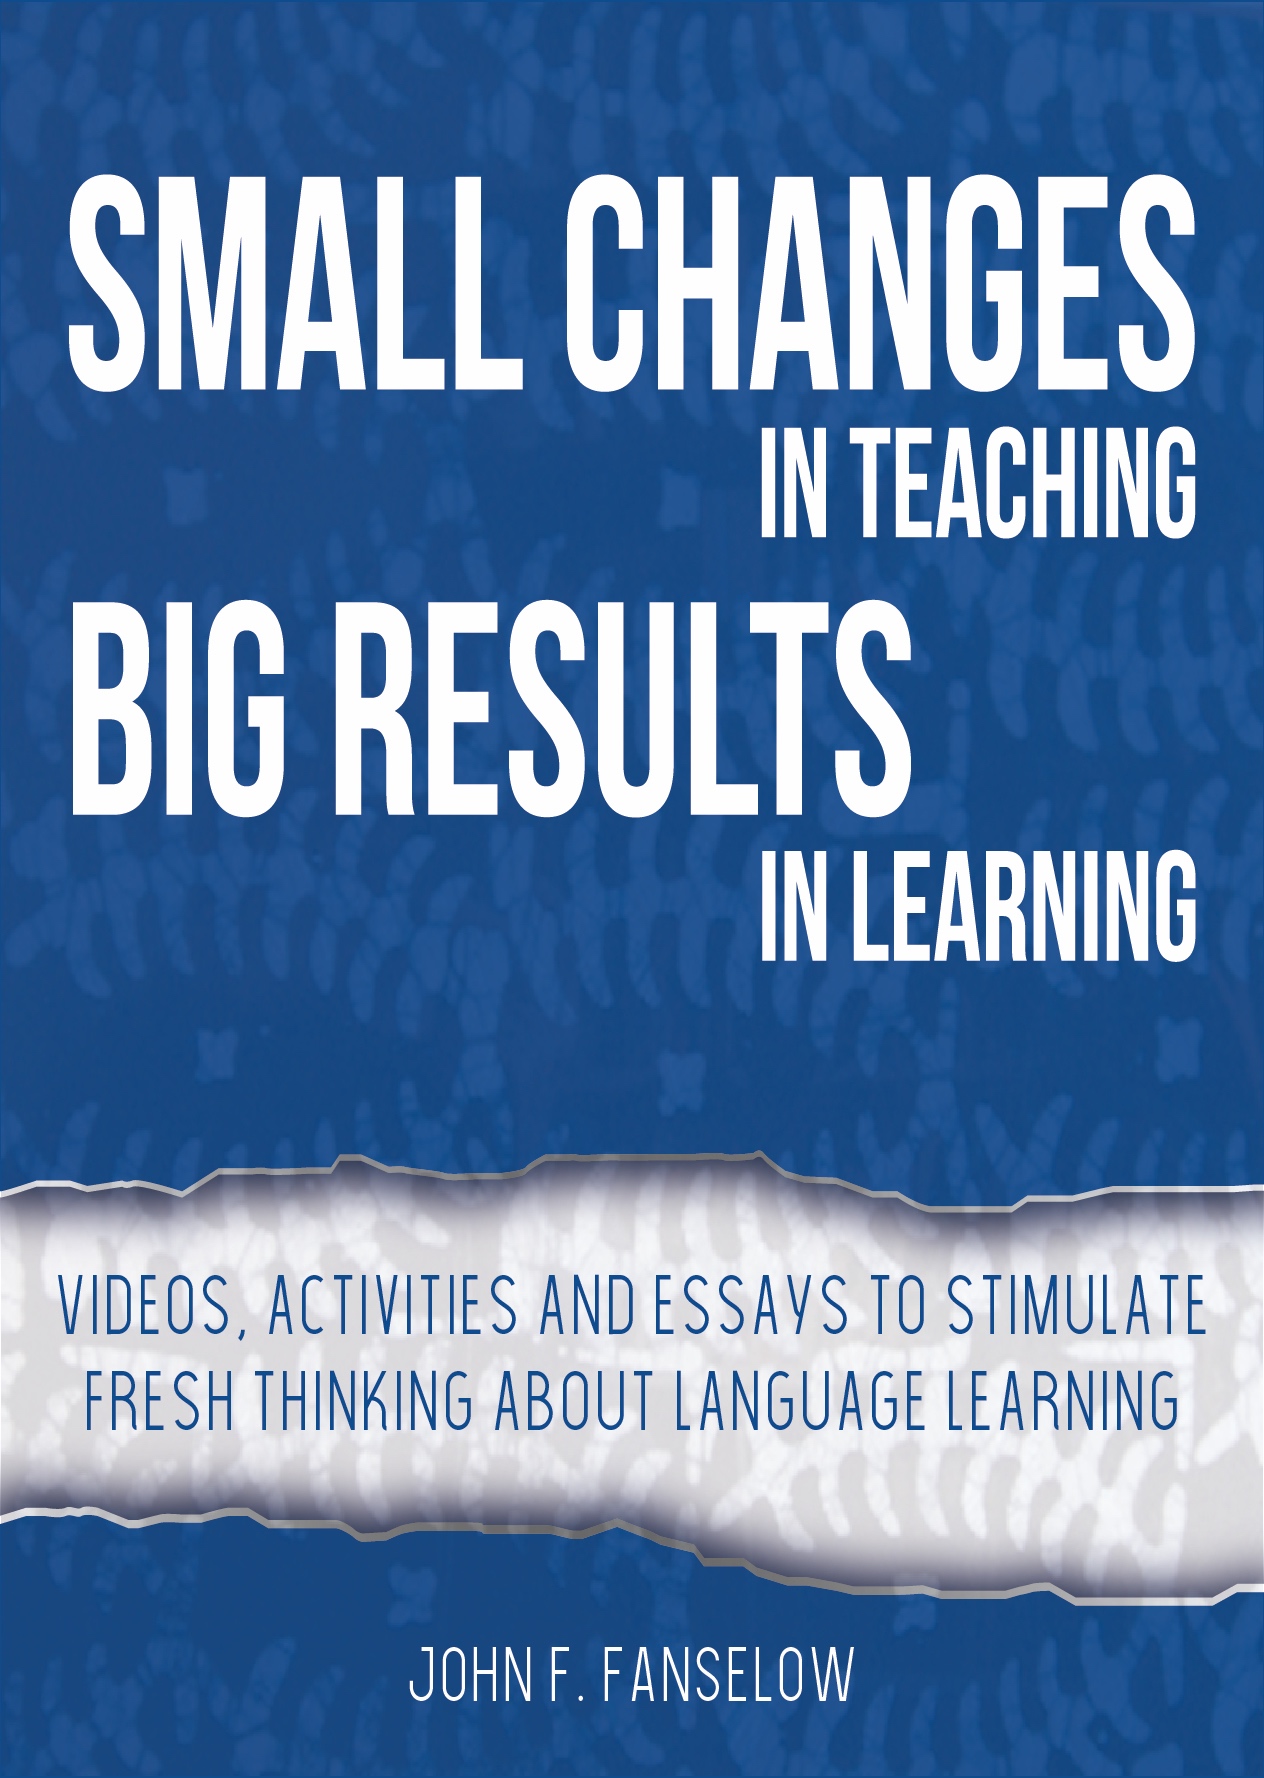 Small Changes in Teaching BIG RESULTS IN LEARNING bookcover